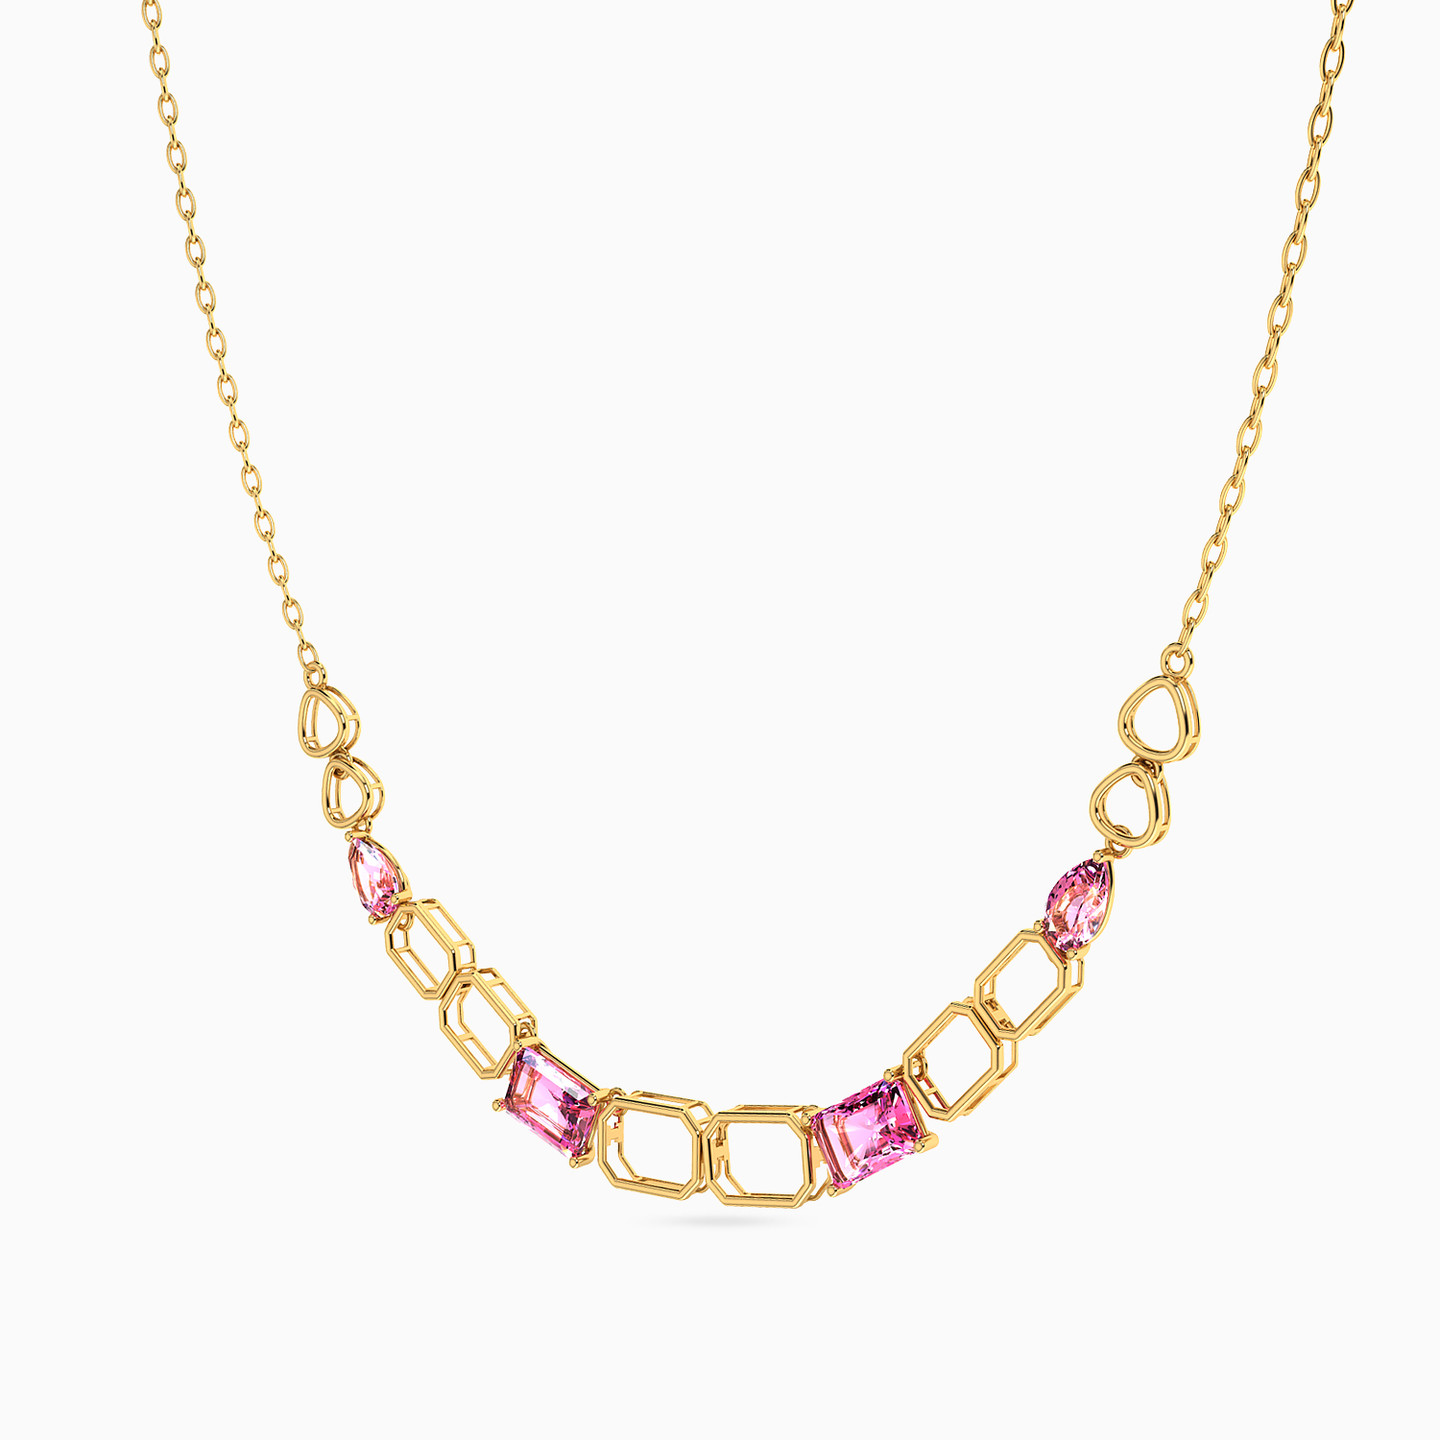 18K Gold Colored Stones Chain Necklace - 2